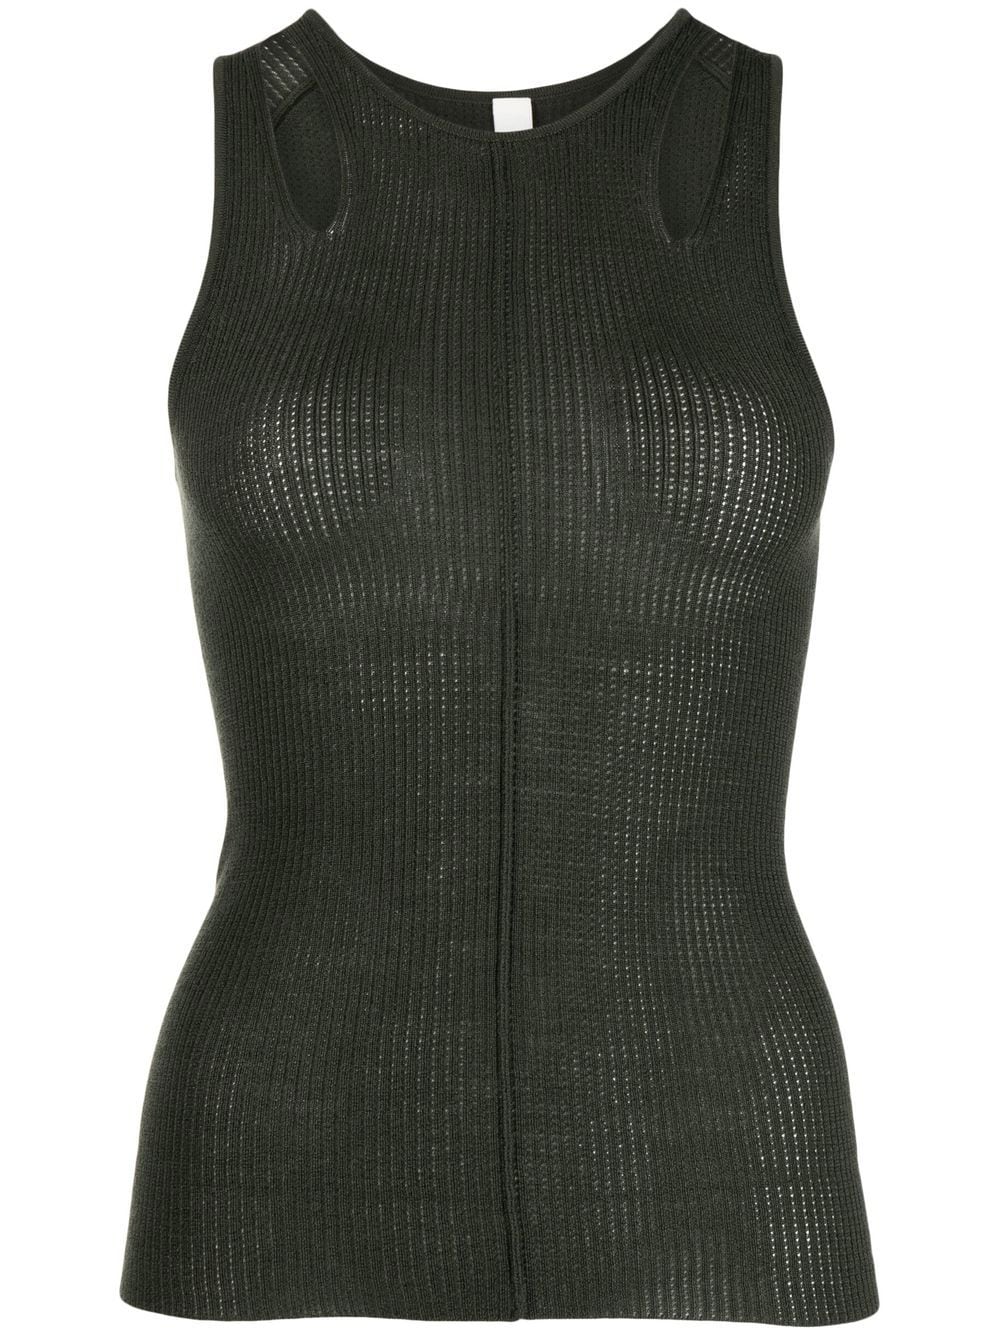 Dion Lee Merino Pointelle ribbed tank top - Green